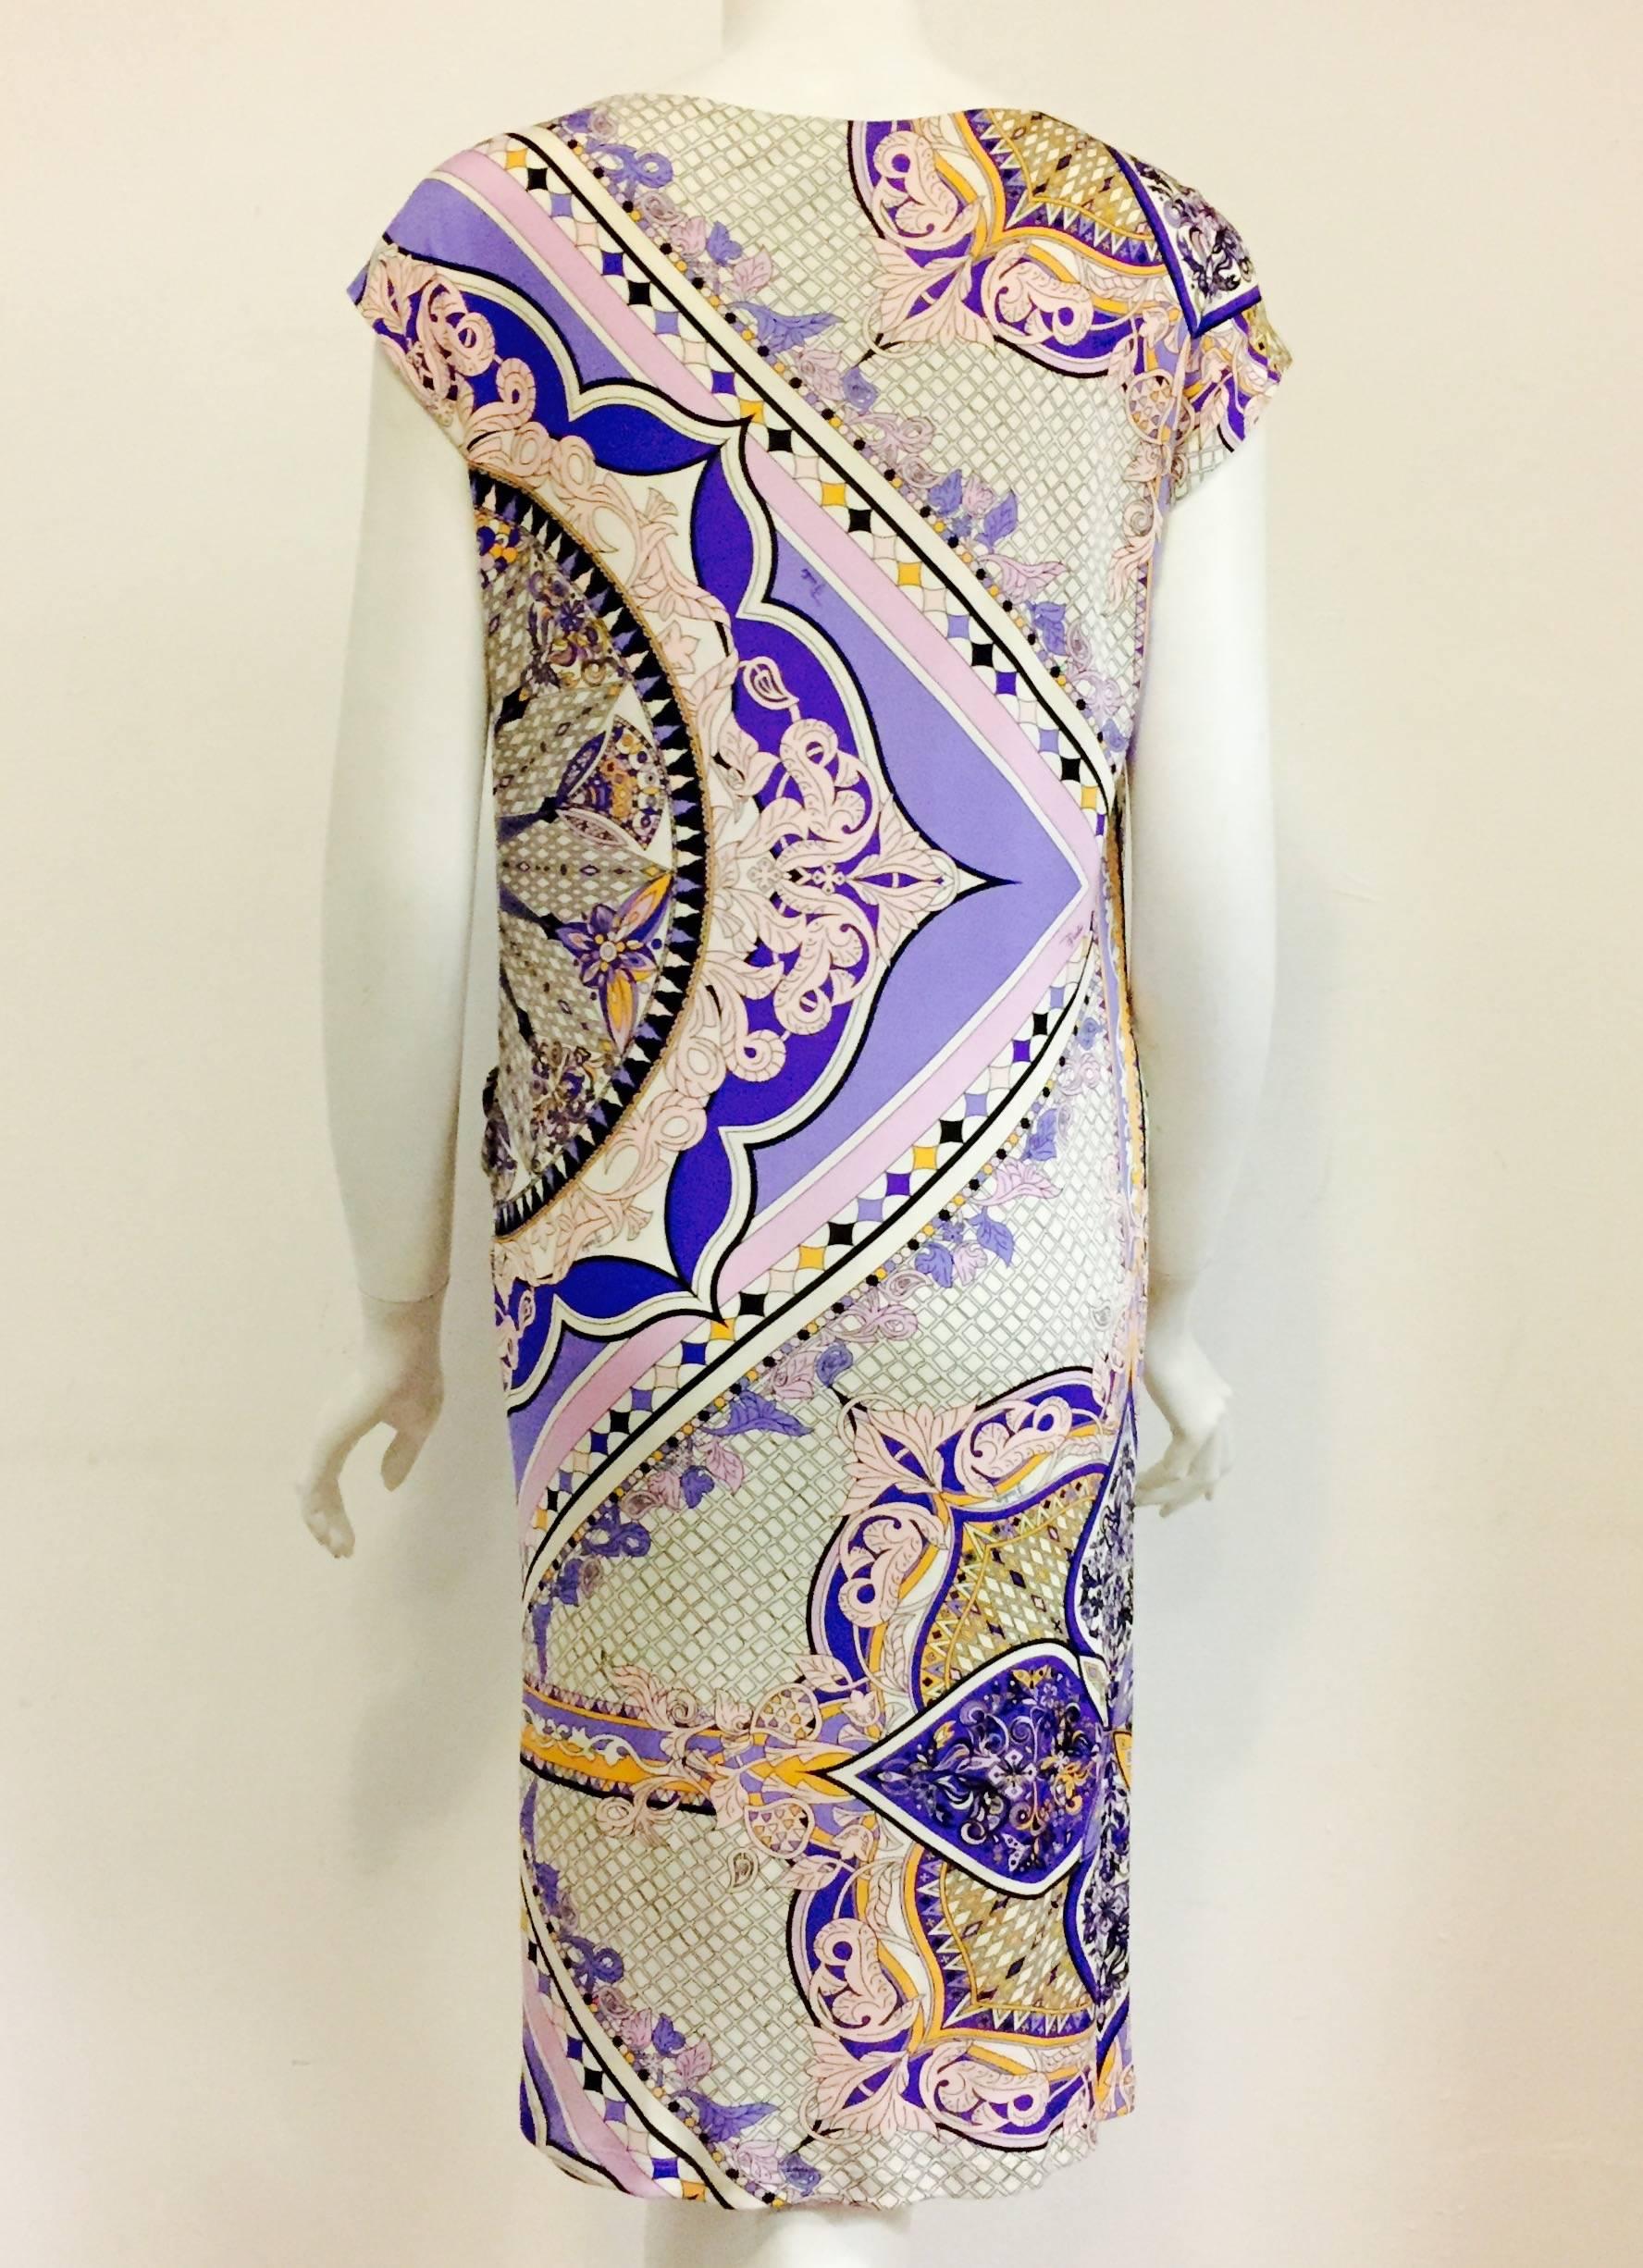 Emilio Pucci Silk Sheath With Circle Designs in Purple and Lavender In Excellent Condition For Sale In Palm Beach, FL